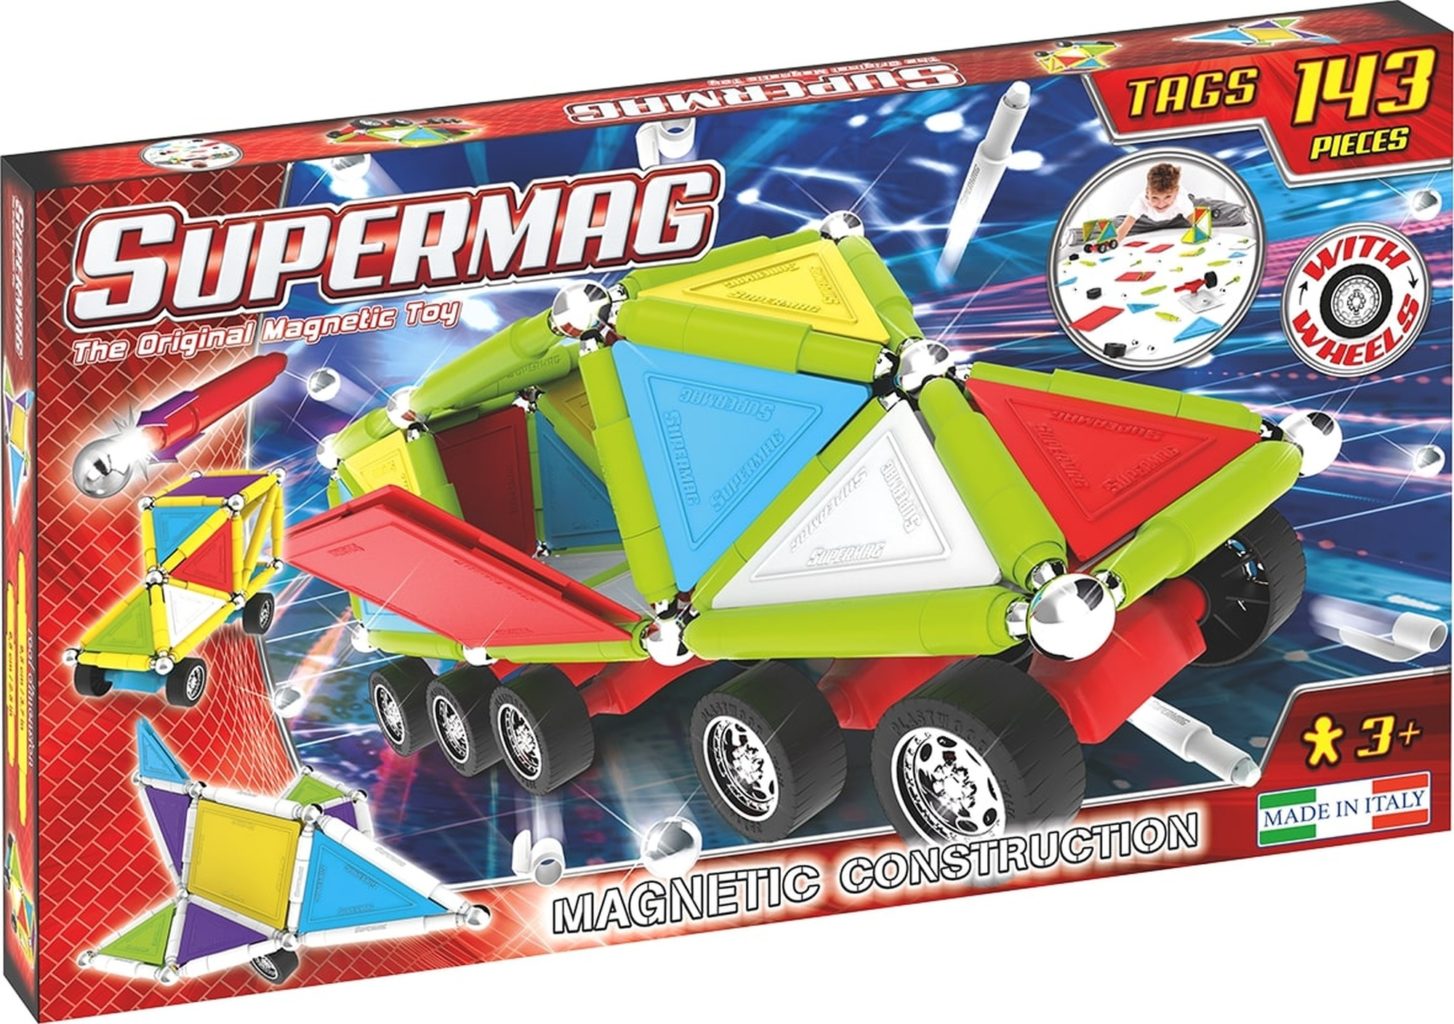 Set Constructie Tags Wheels 143 Pcs - Supermag - prin Didactopia by Evertoys